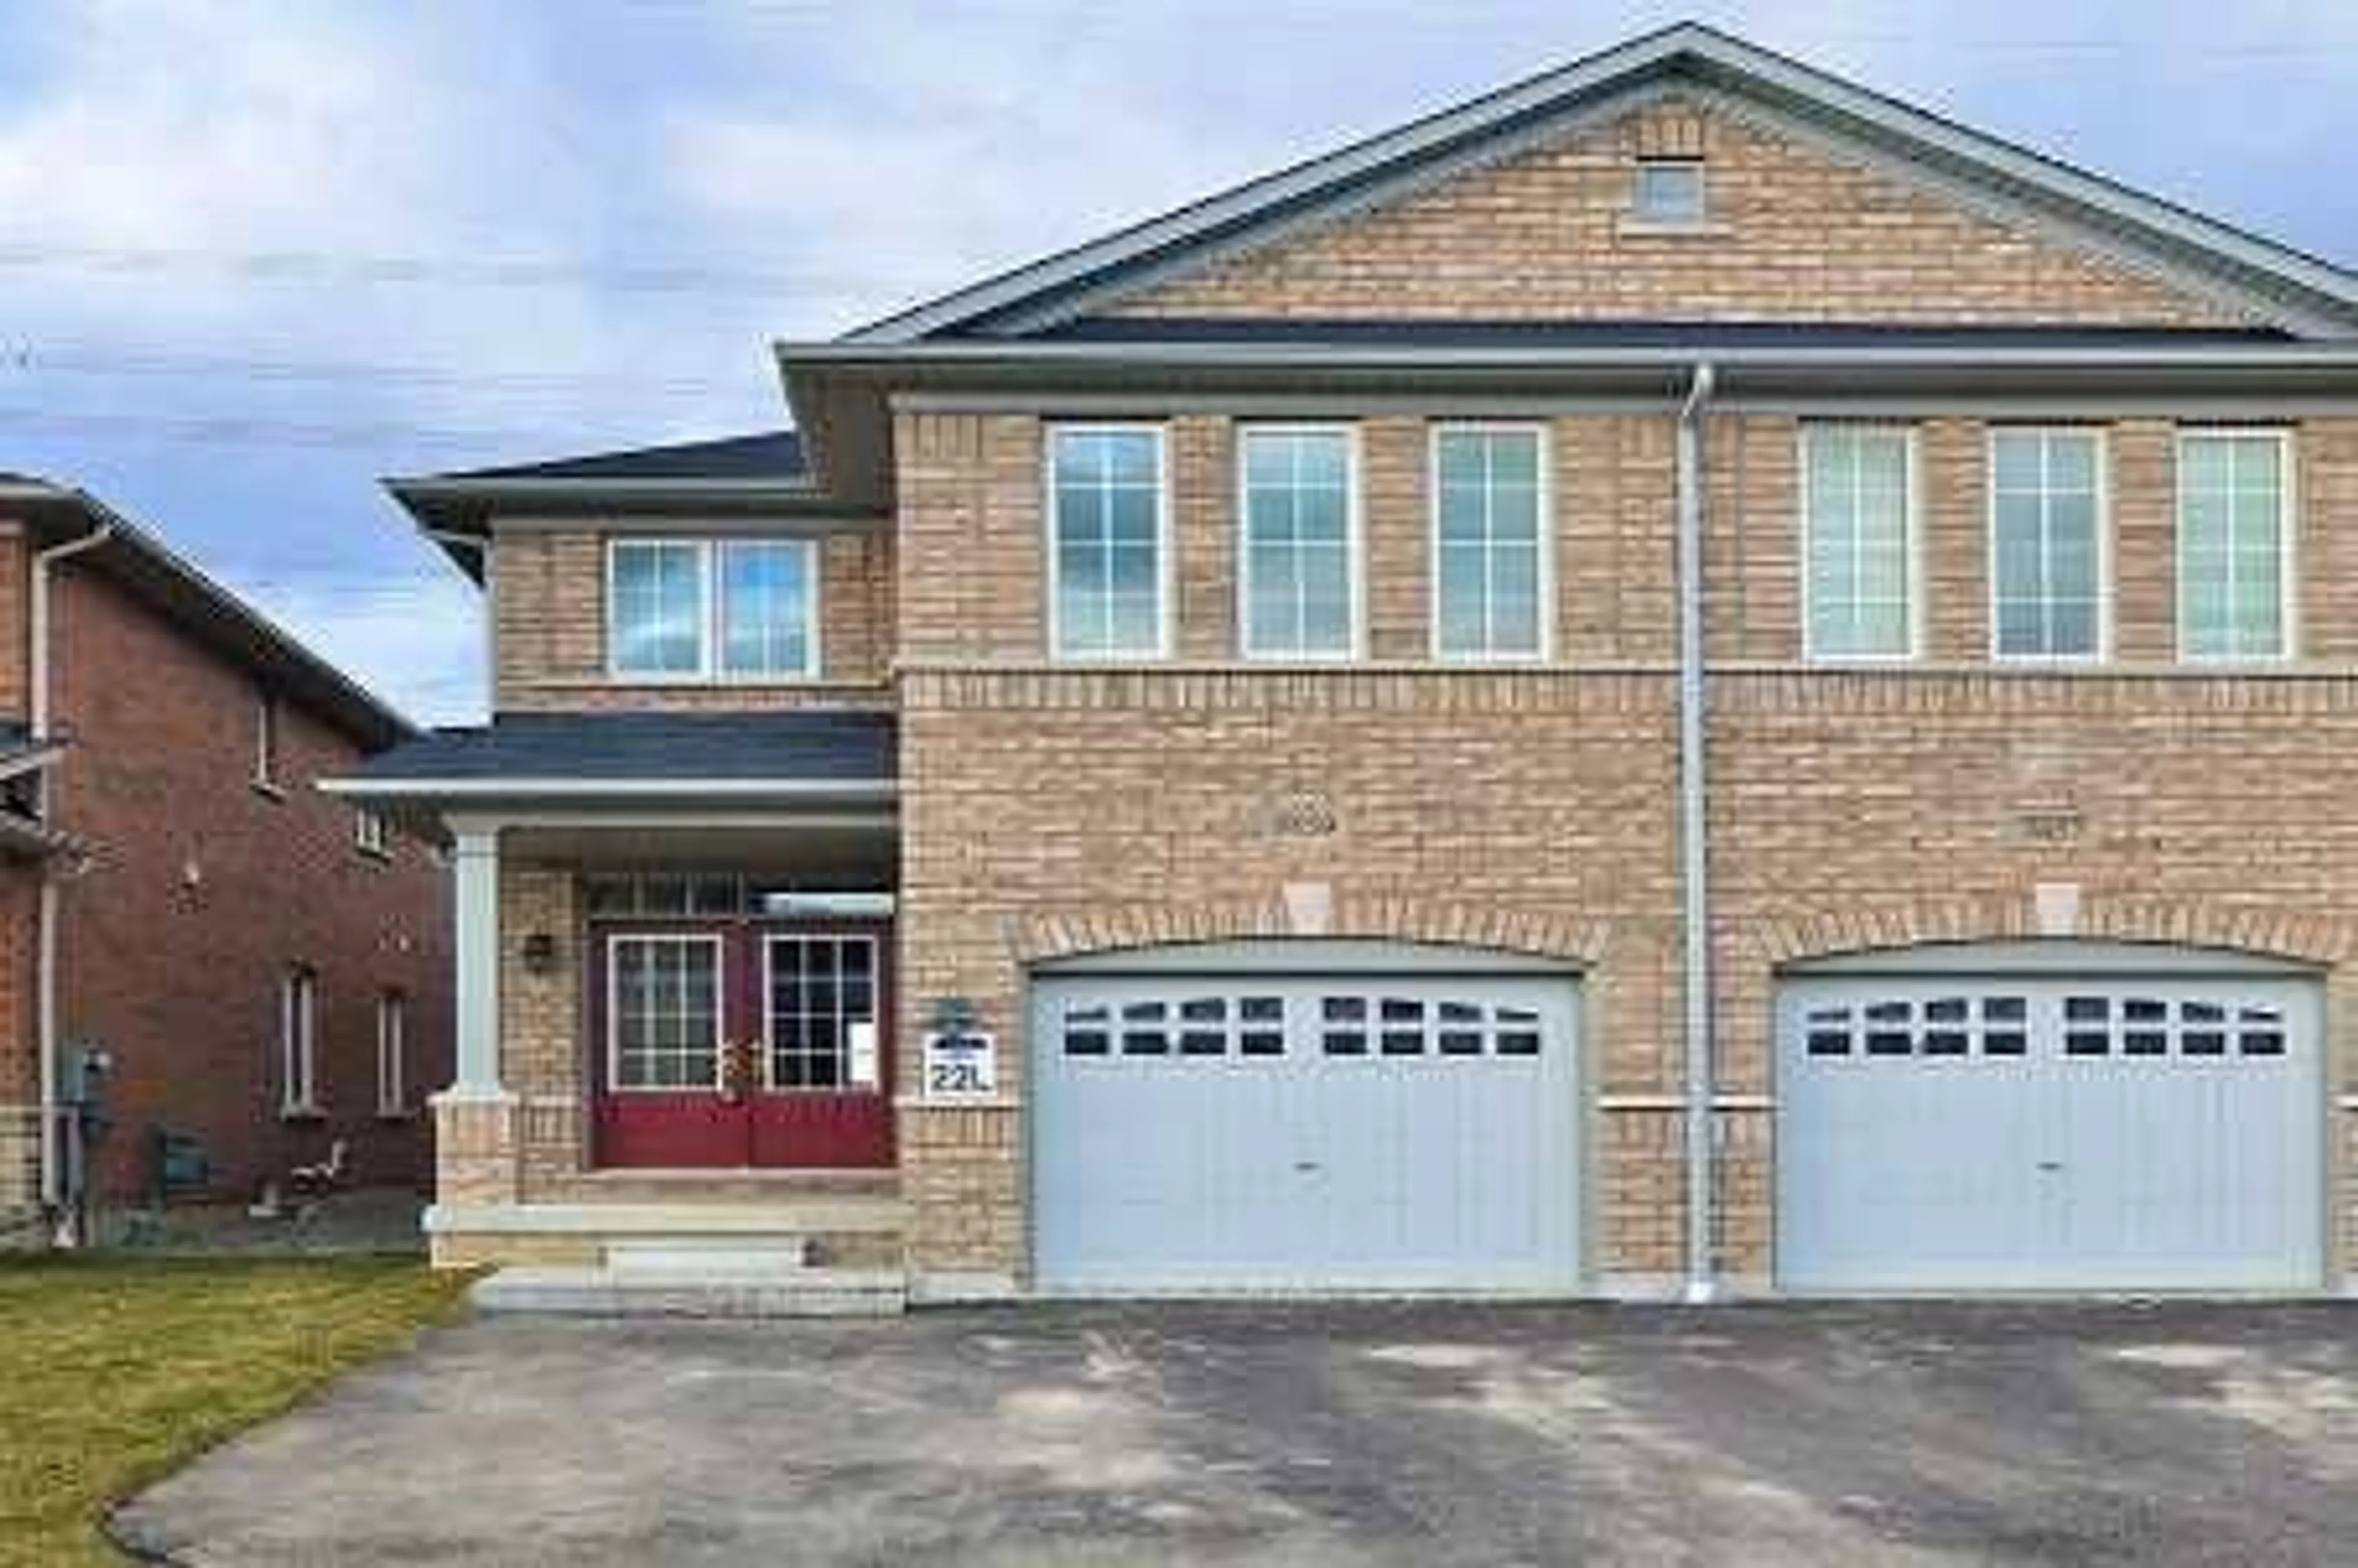 Home with brick exterior material for 7459 St. Barbara Blvd, Mississauga Ontario L5W 0G3